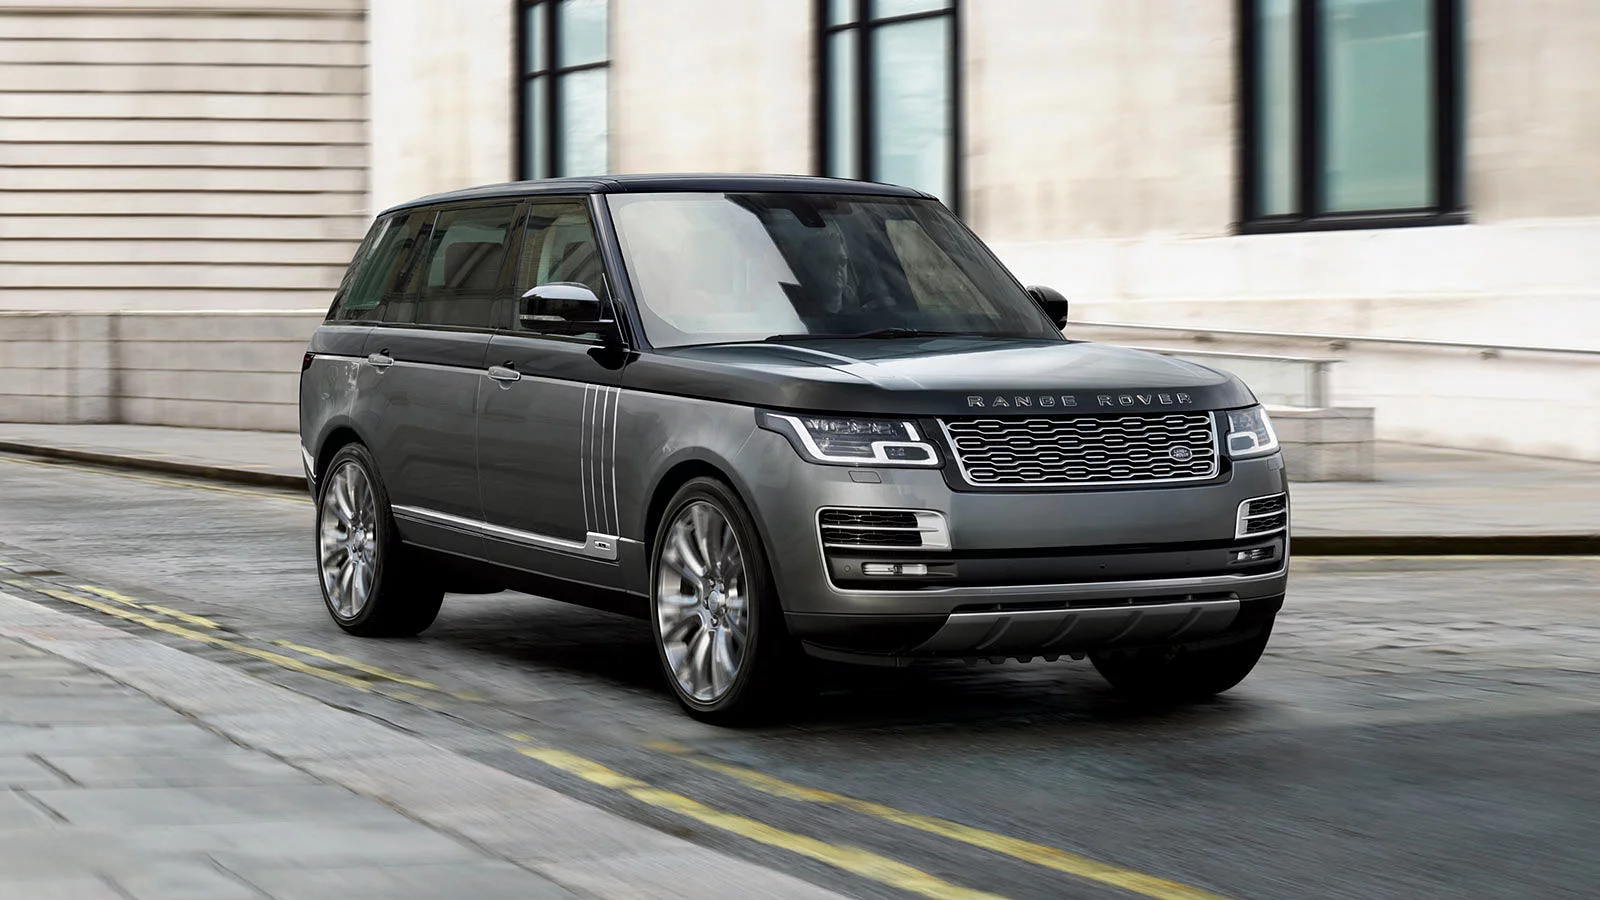 RANGE ROVER <textsmall style="text-transform: none;">SVAutobiography</textsmall>